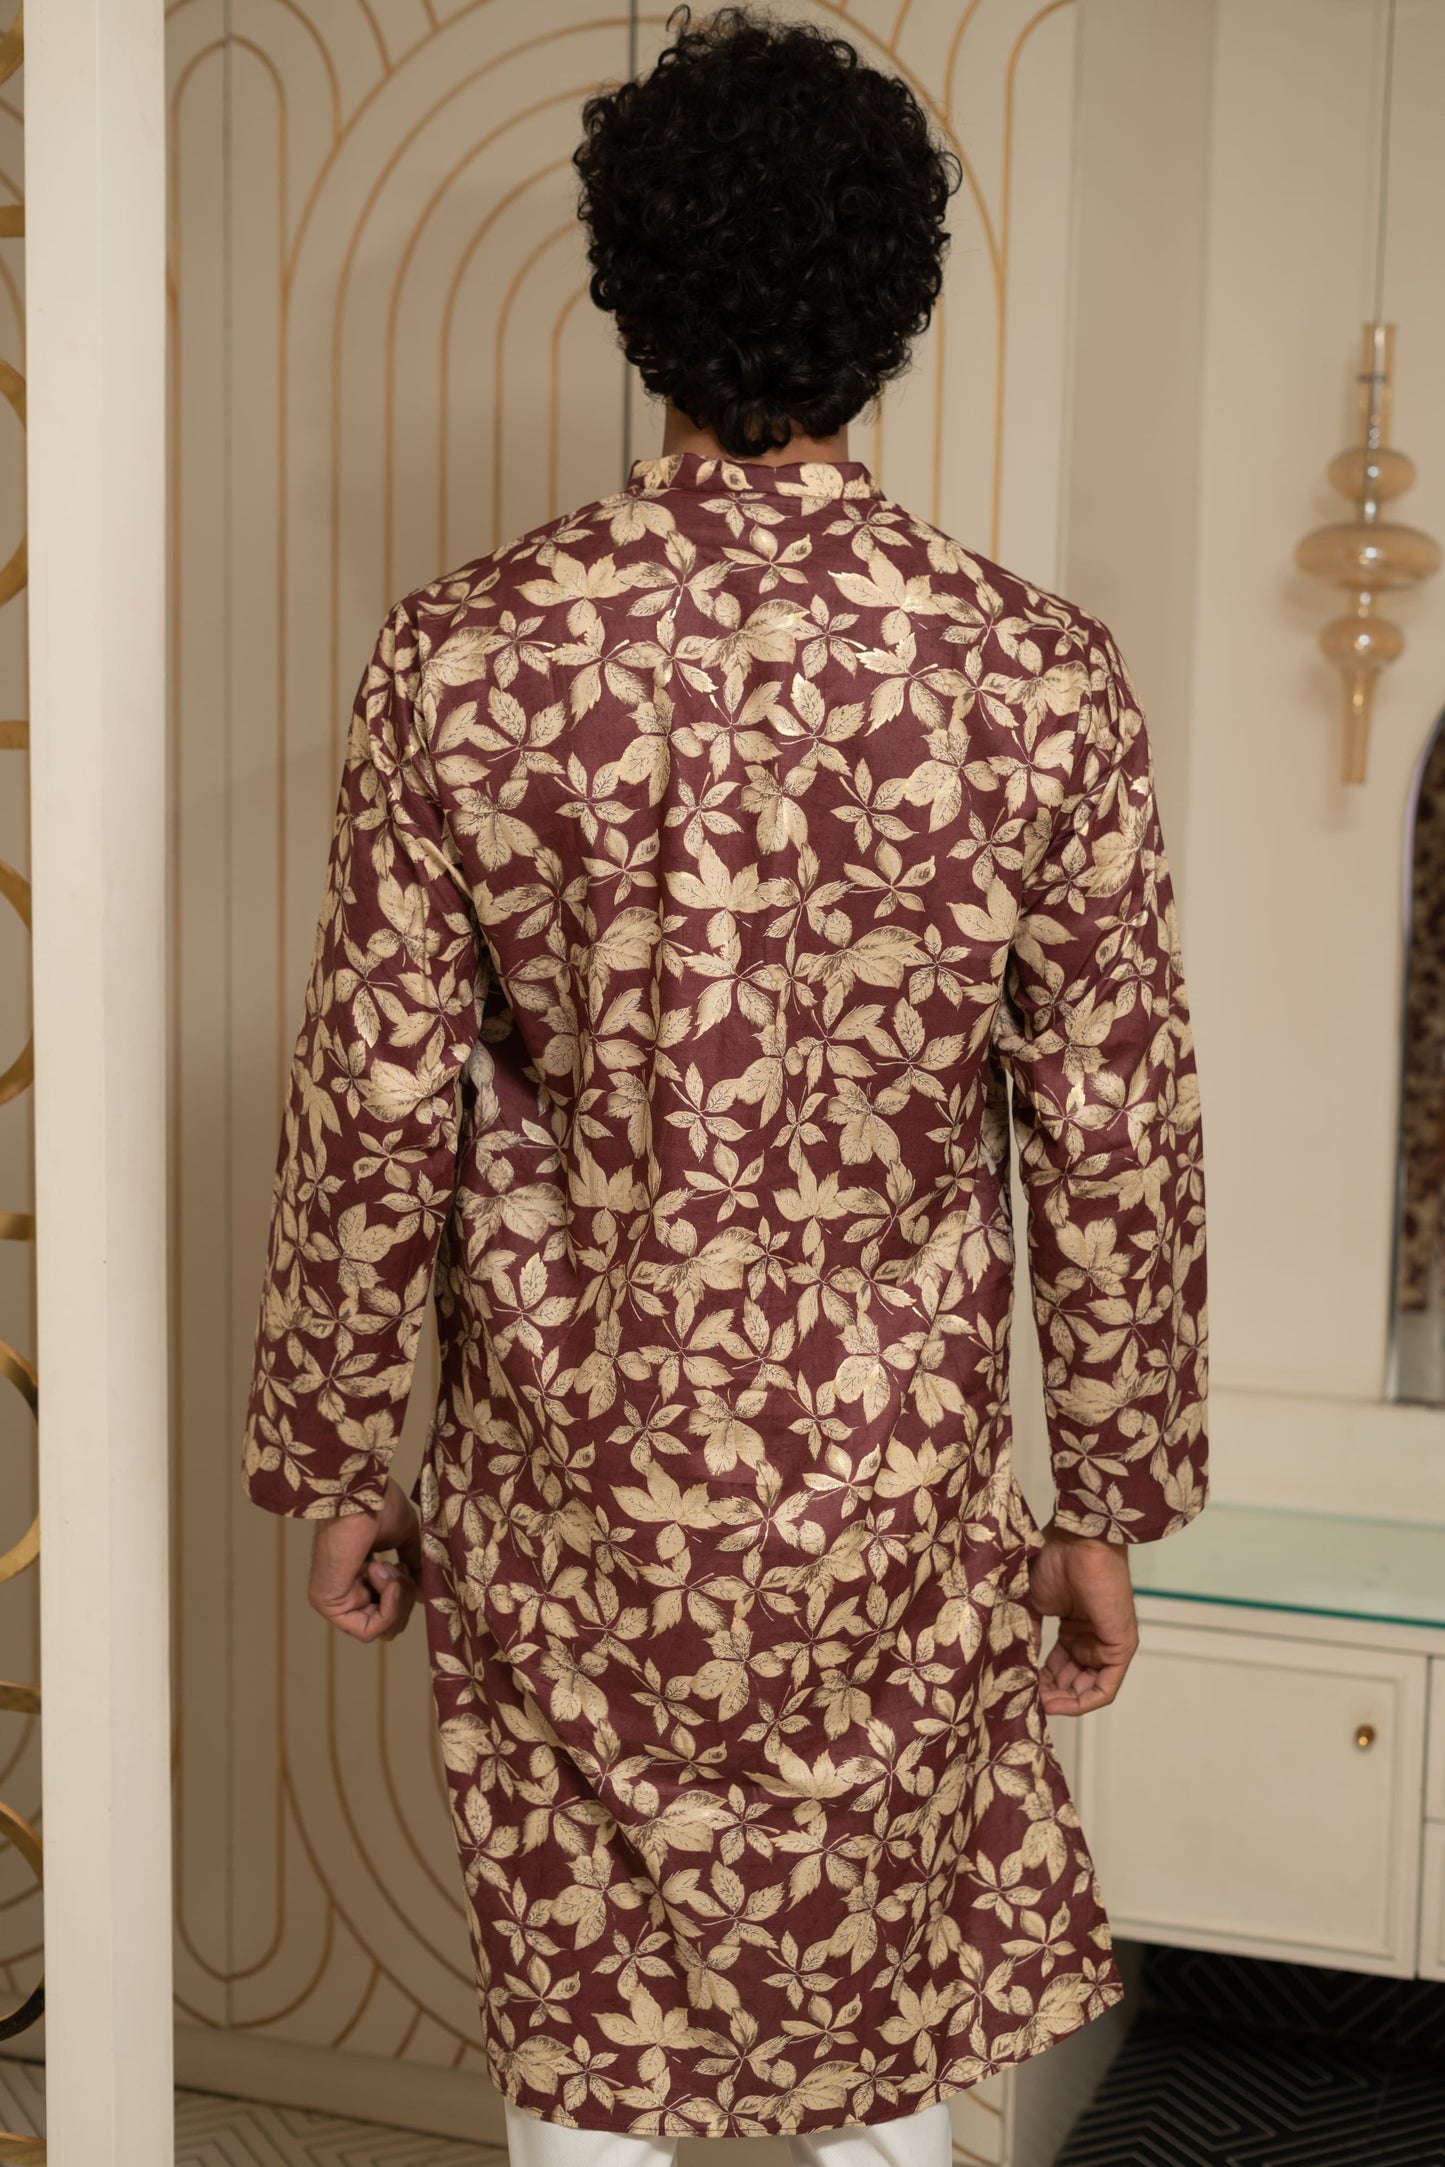 The Maroon All-Over Floral Foil Print Long Kurta